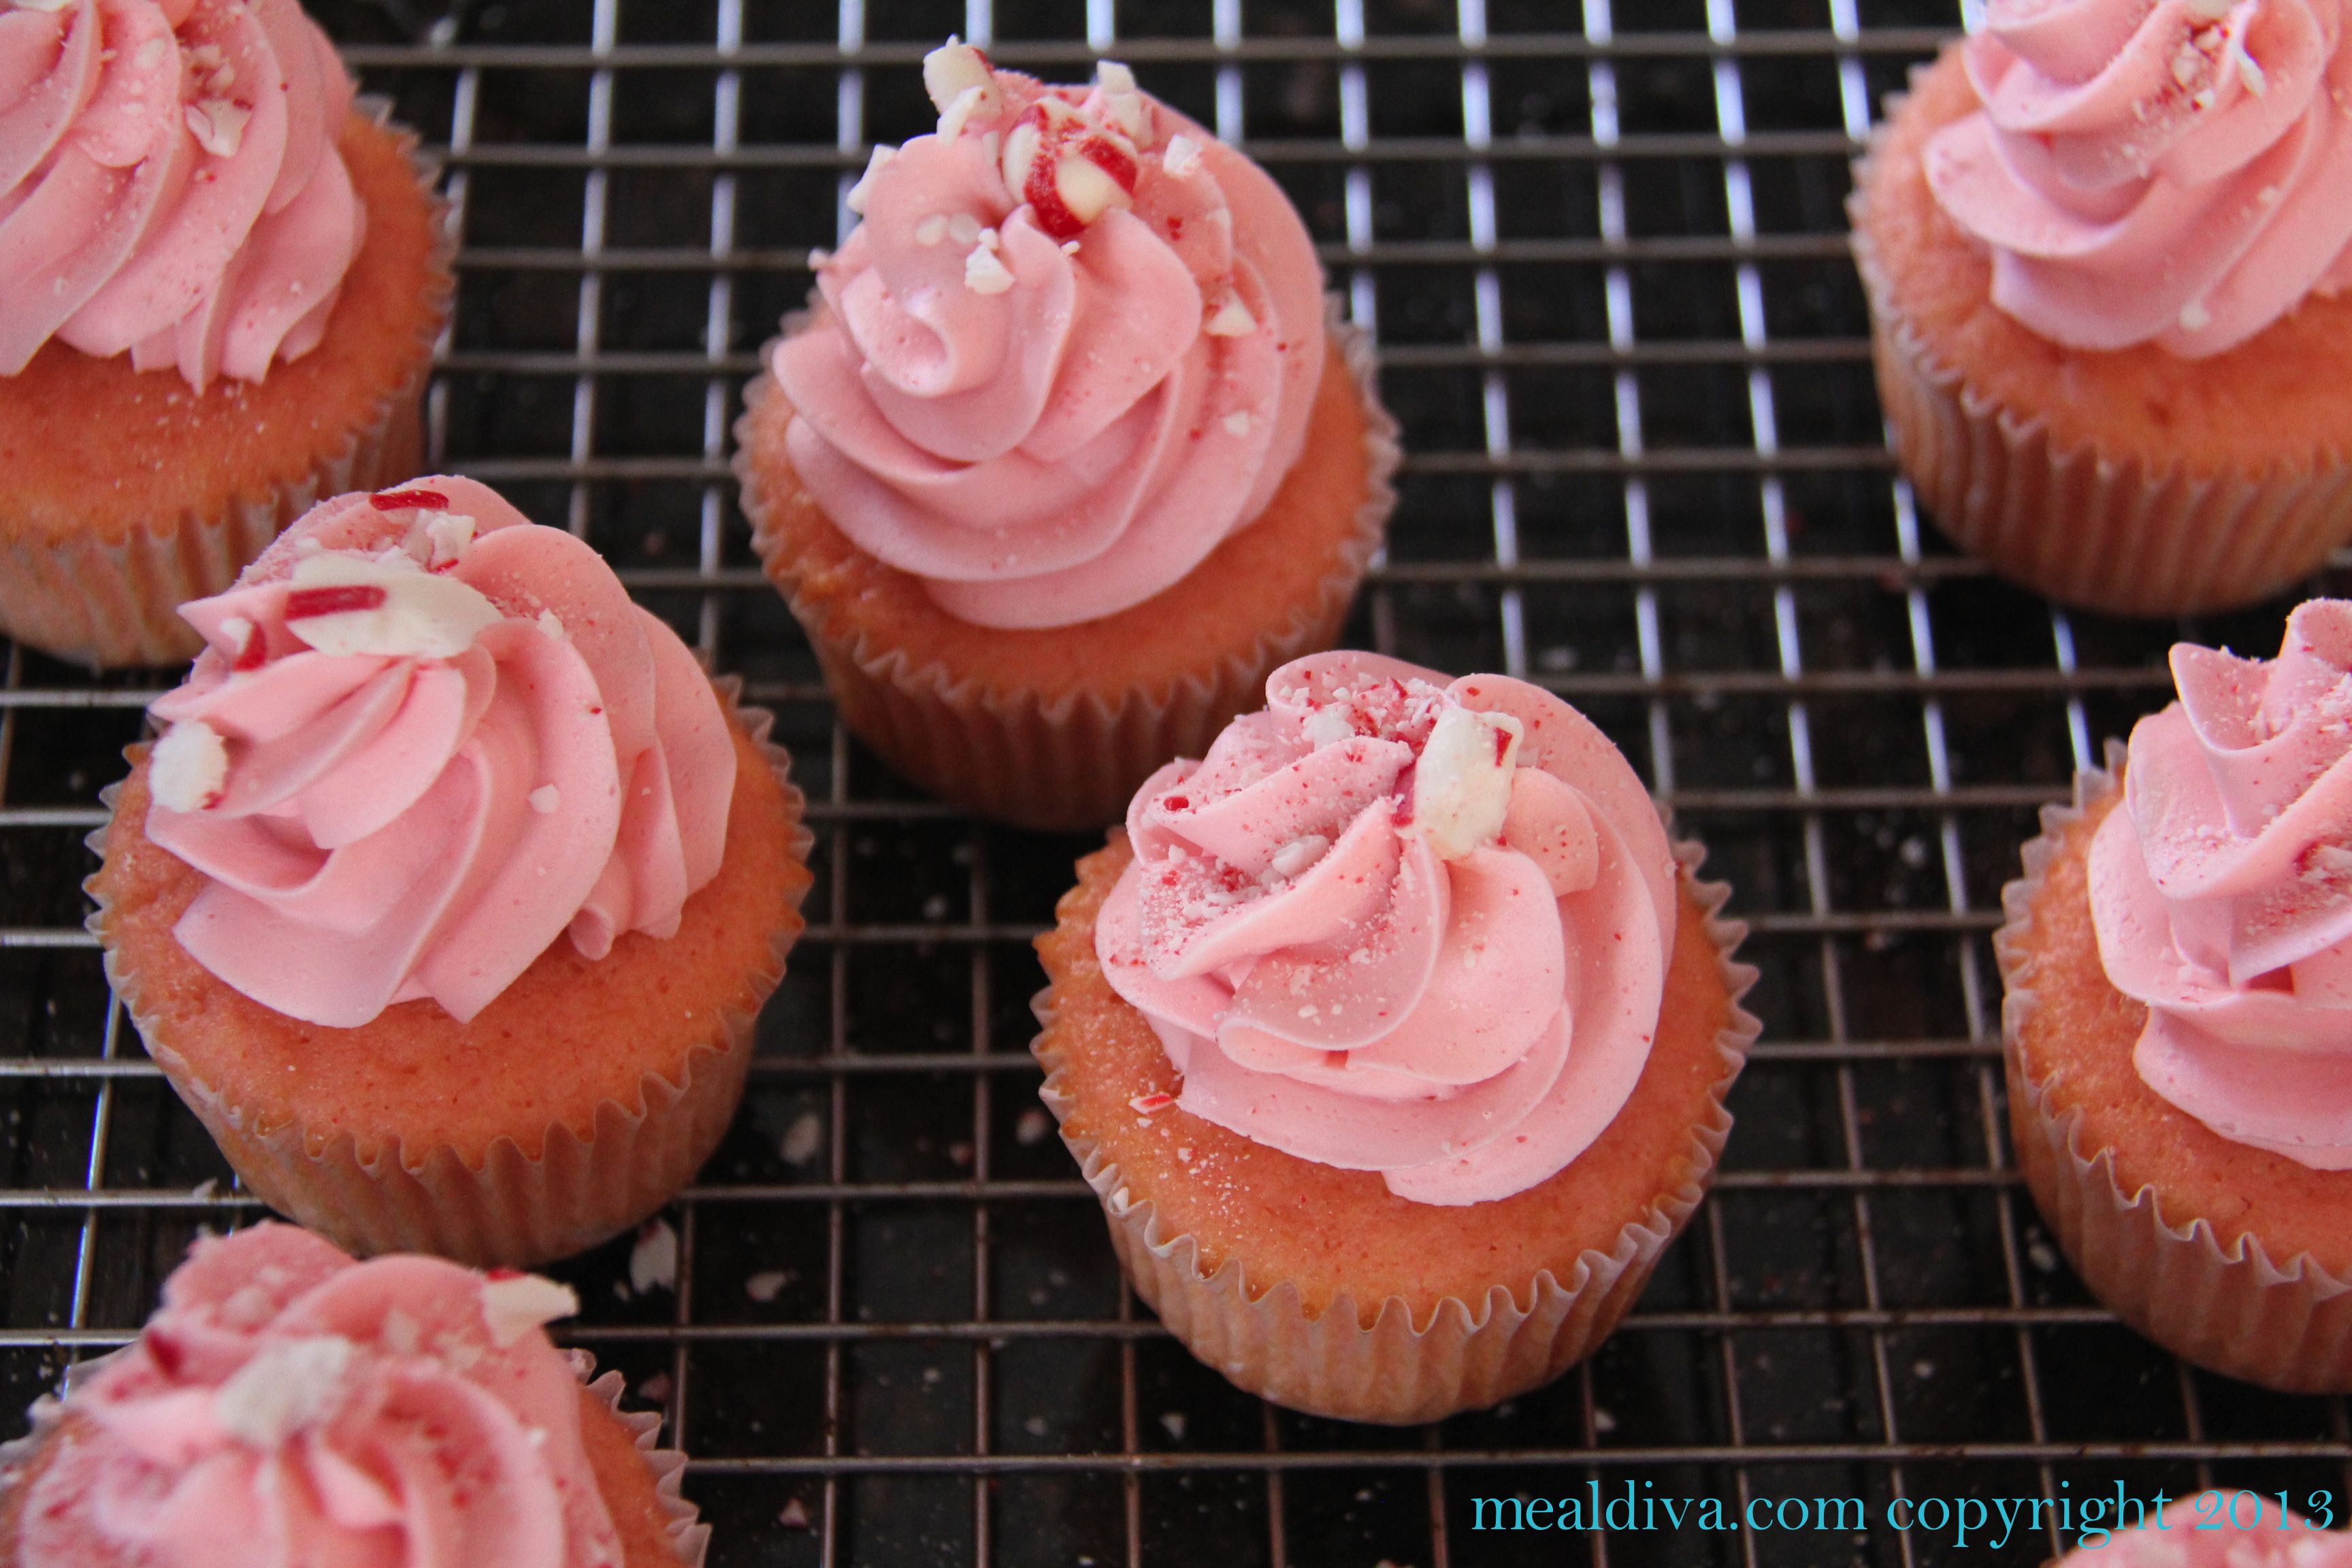 Pink Peppermint Cupcakes